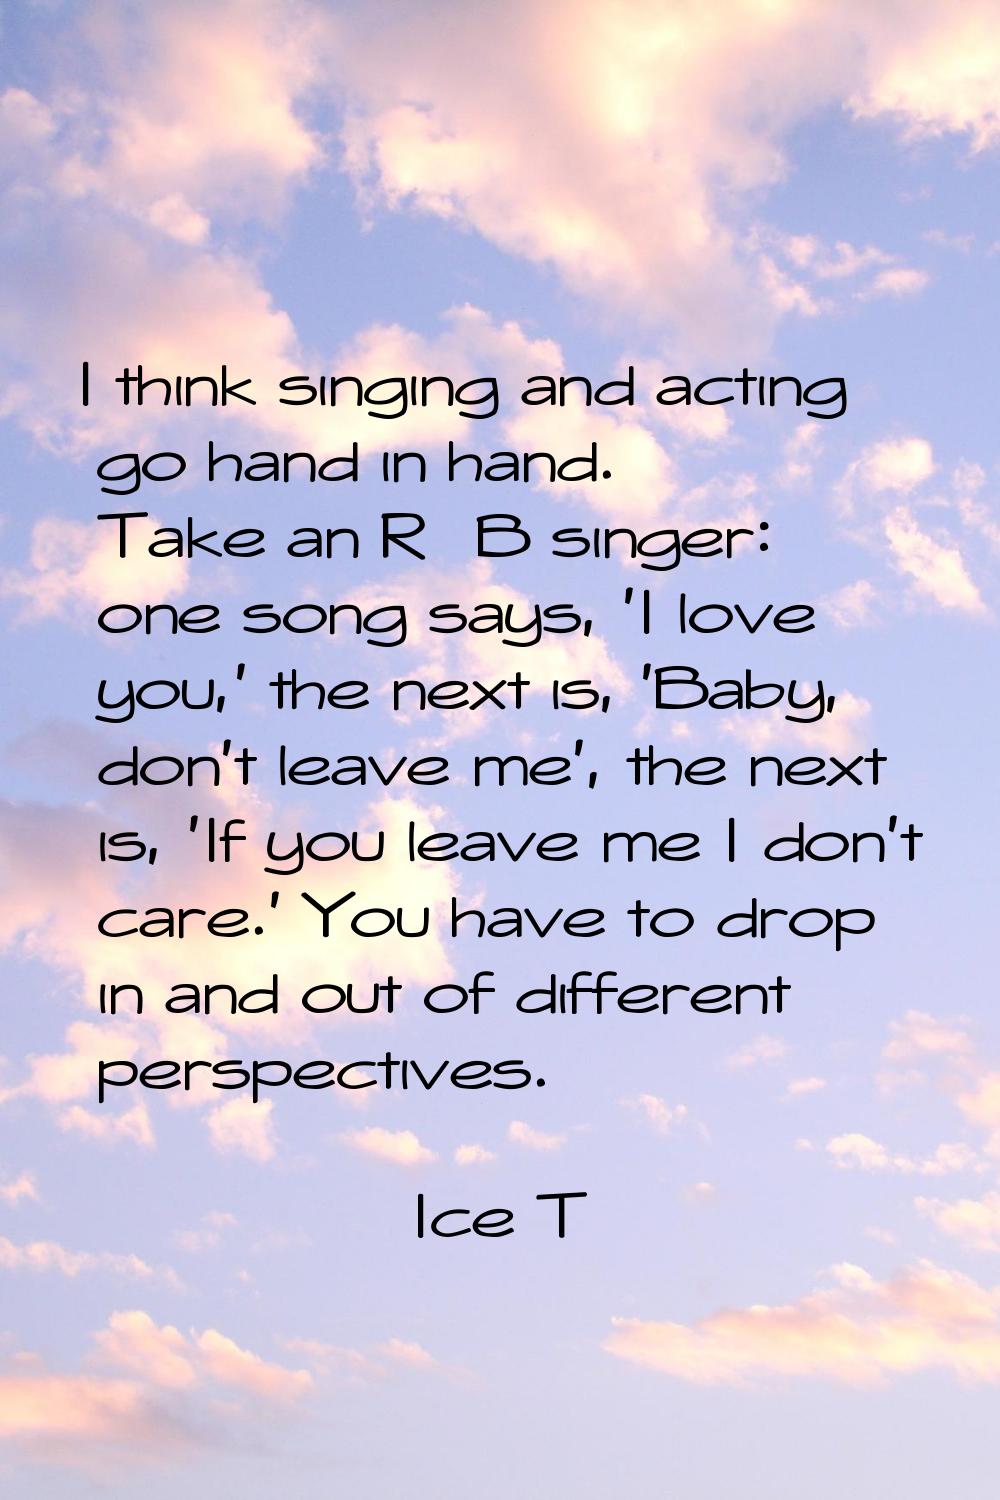 I think singing and acting go hand in hand. Take an R&B singer: one song says, 'I love you,' the ne